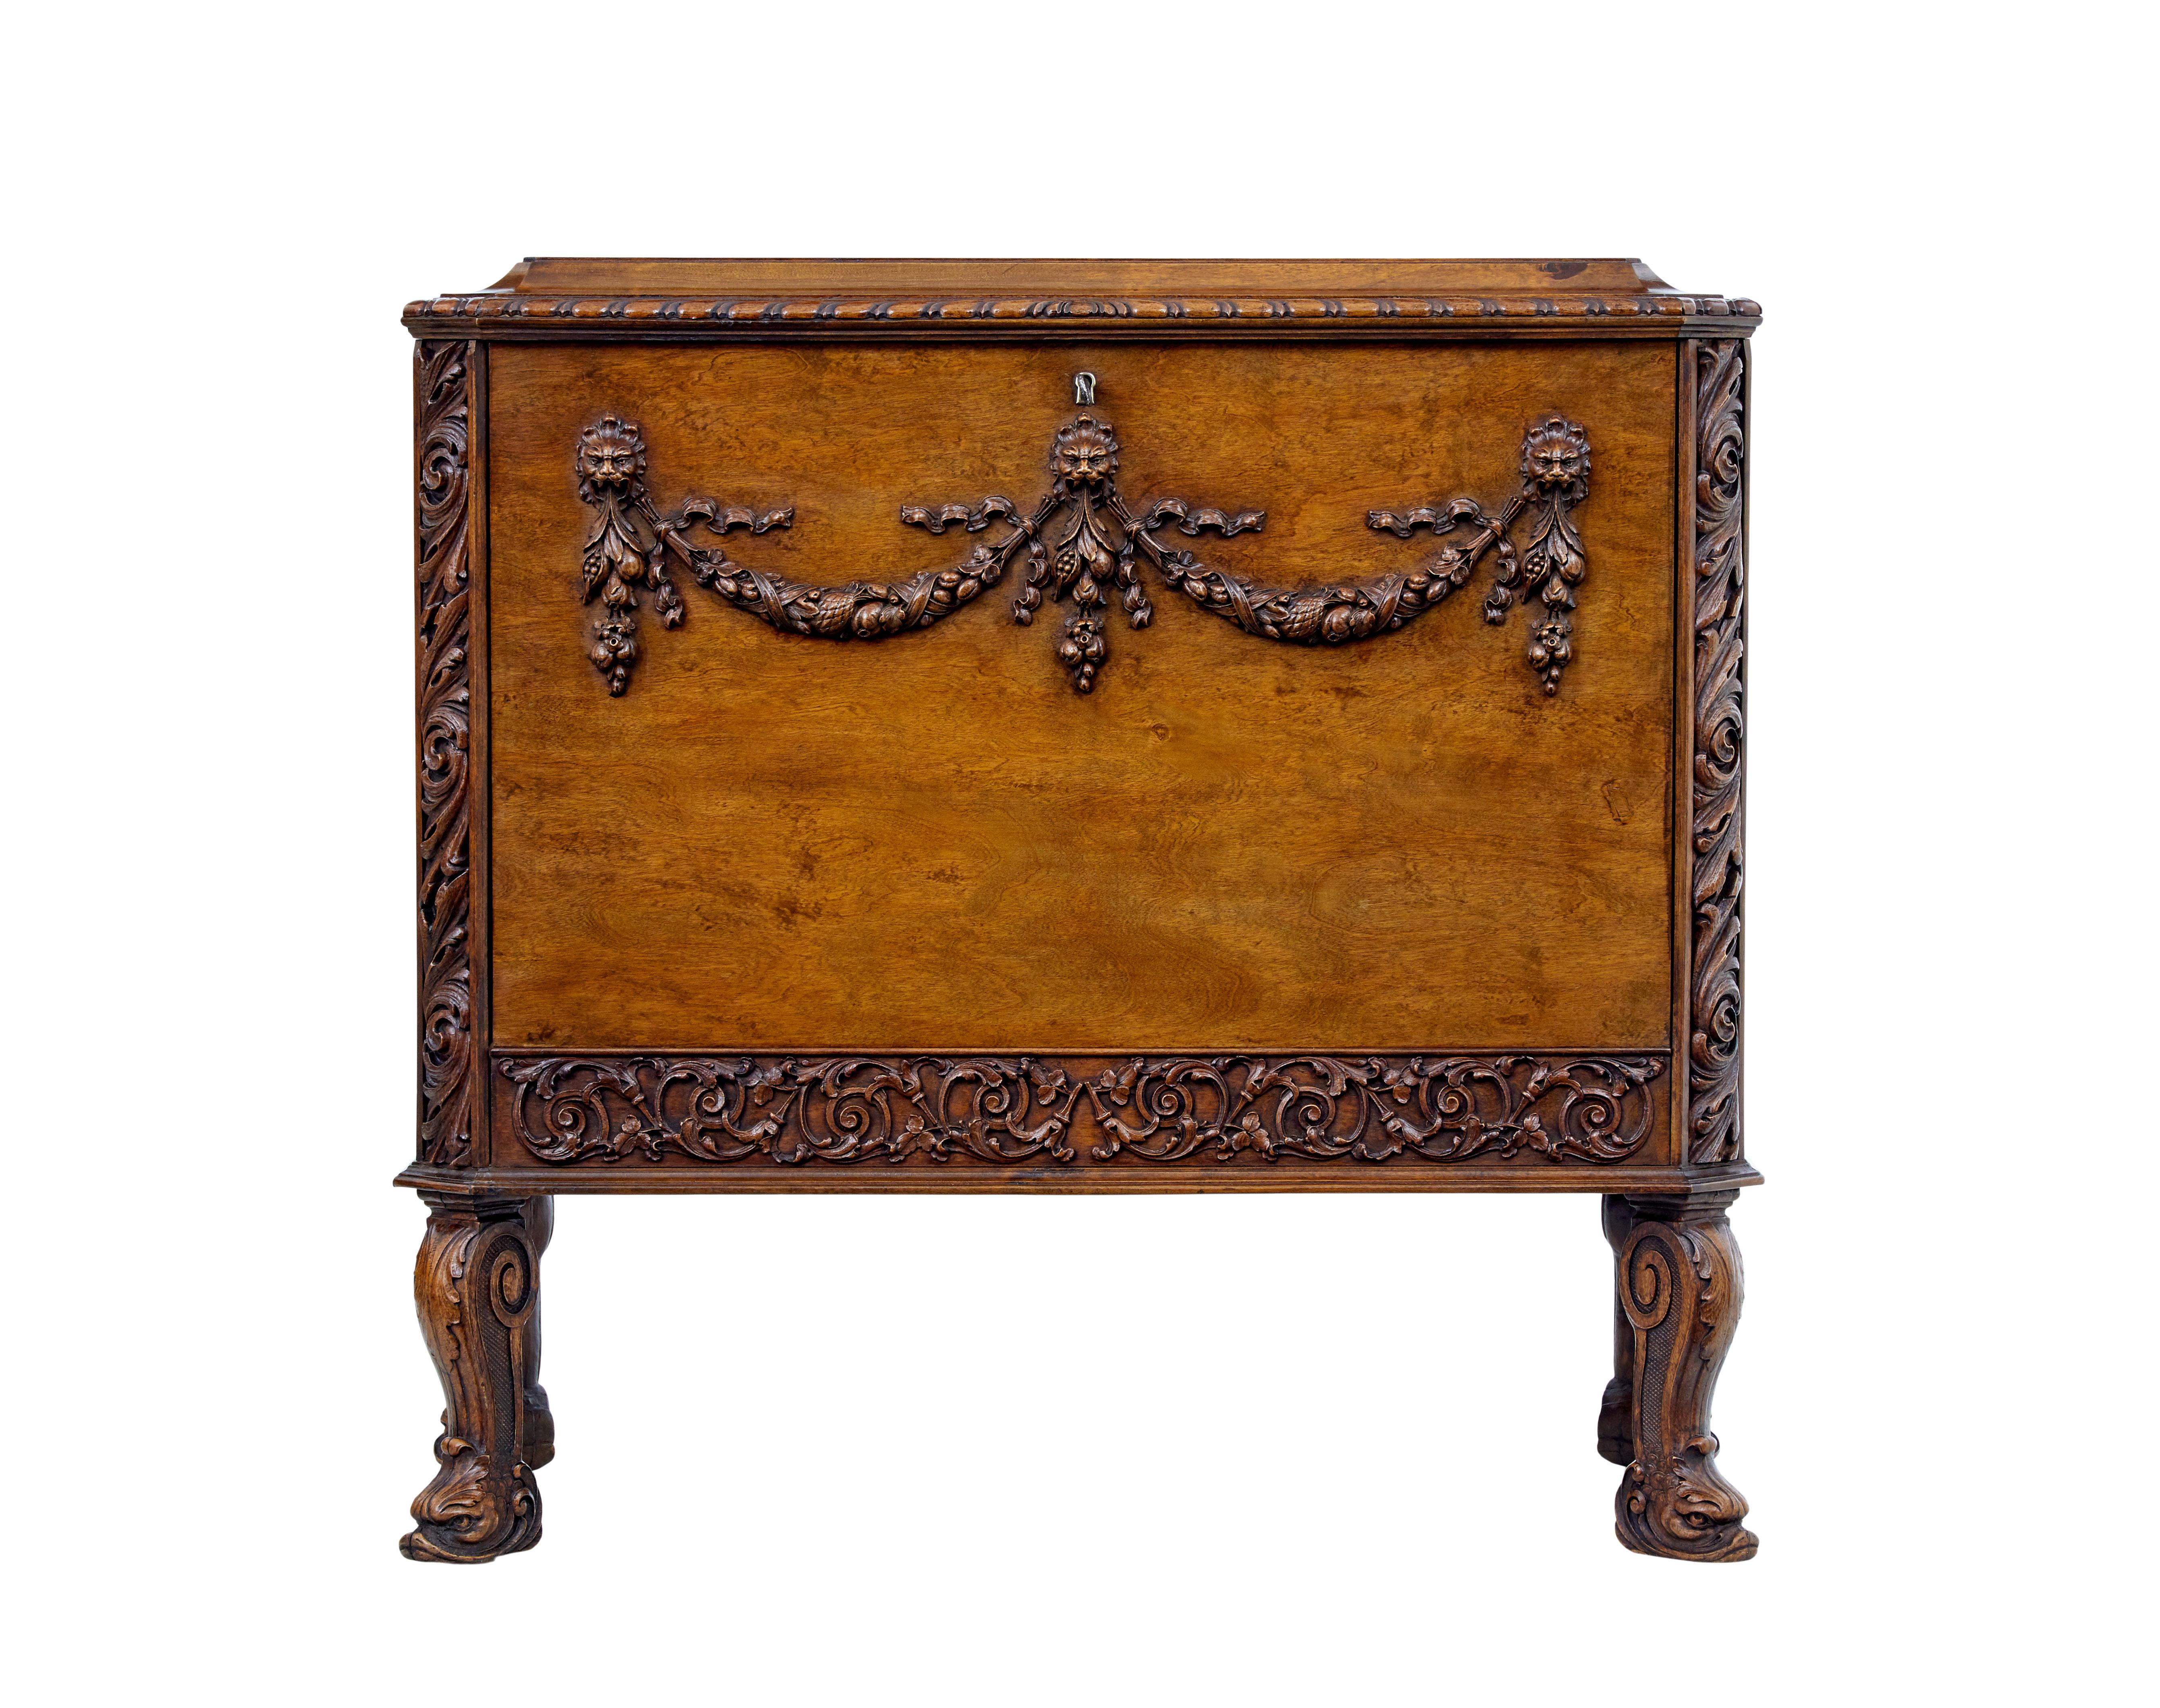 Carved Scandinavian concealed chest of drawers circa 1940.

Designed in the Rococo style with drop down front to reveal 2 fitted birch drawers. Canted corners with applied carvings. Applied swag carvings to the front with lion heads. Standing on 4